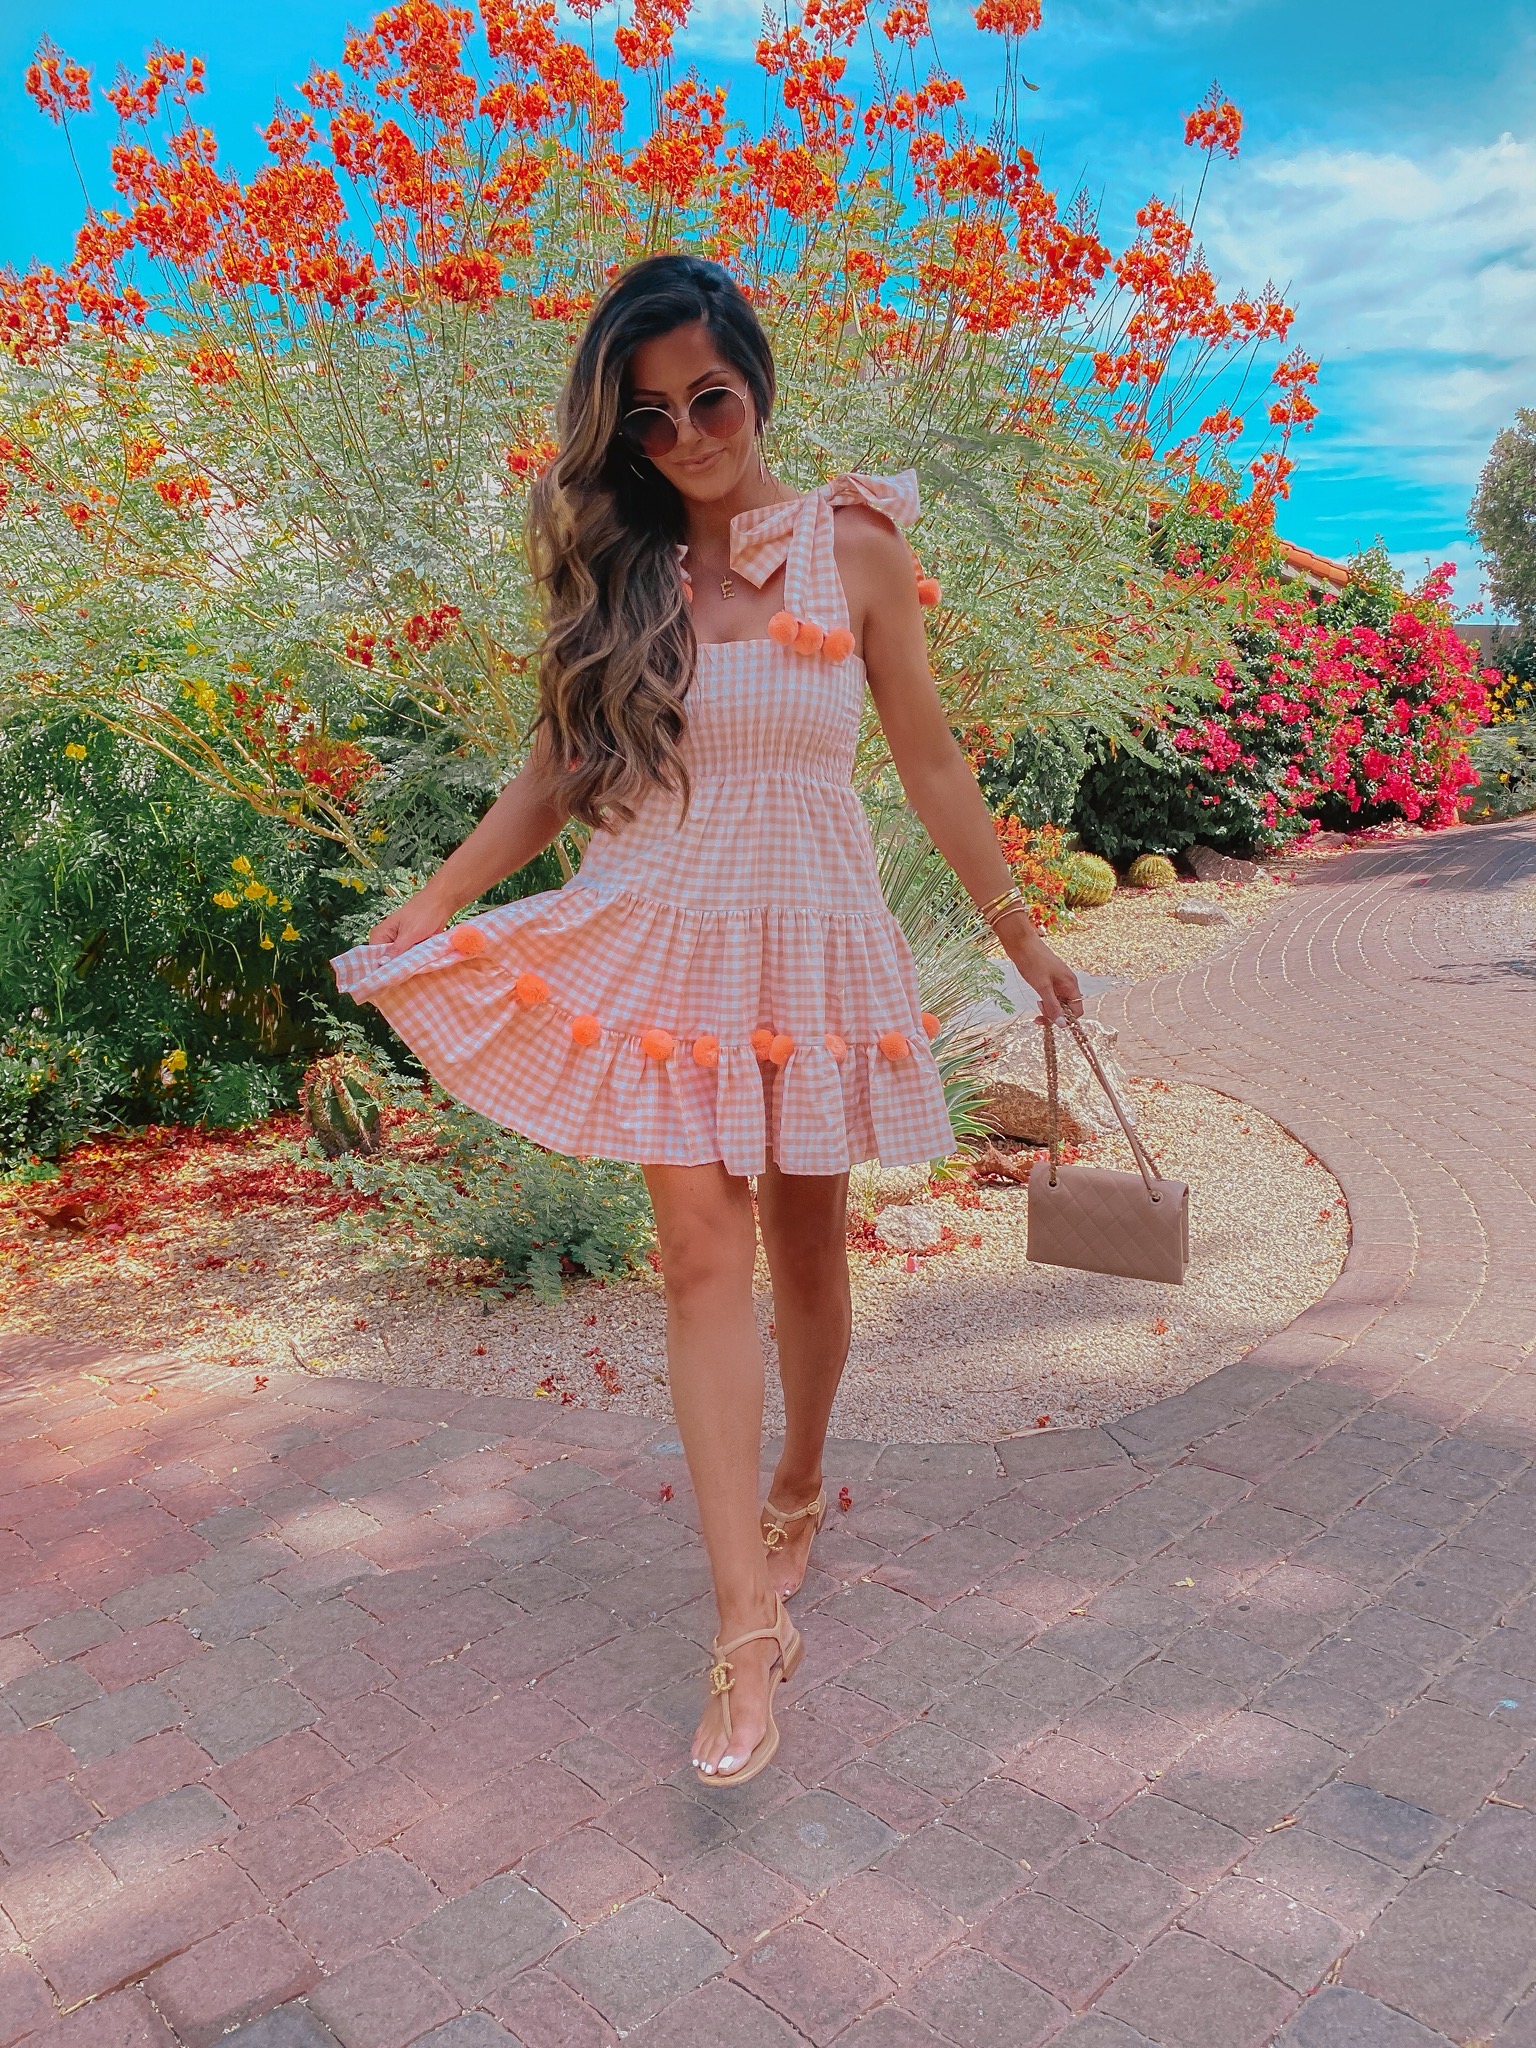 Instagram Recap by popular US life an style blog, The Sweetest Thing: image of Emily Gemma walking outside by a flowering bush and wearing a Pippa orange gingham and pom pom dress, Chanel sandals, Chloe neckalce, Nadri gold hoop earrings, and carrying a Chanel purse. 